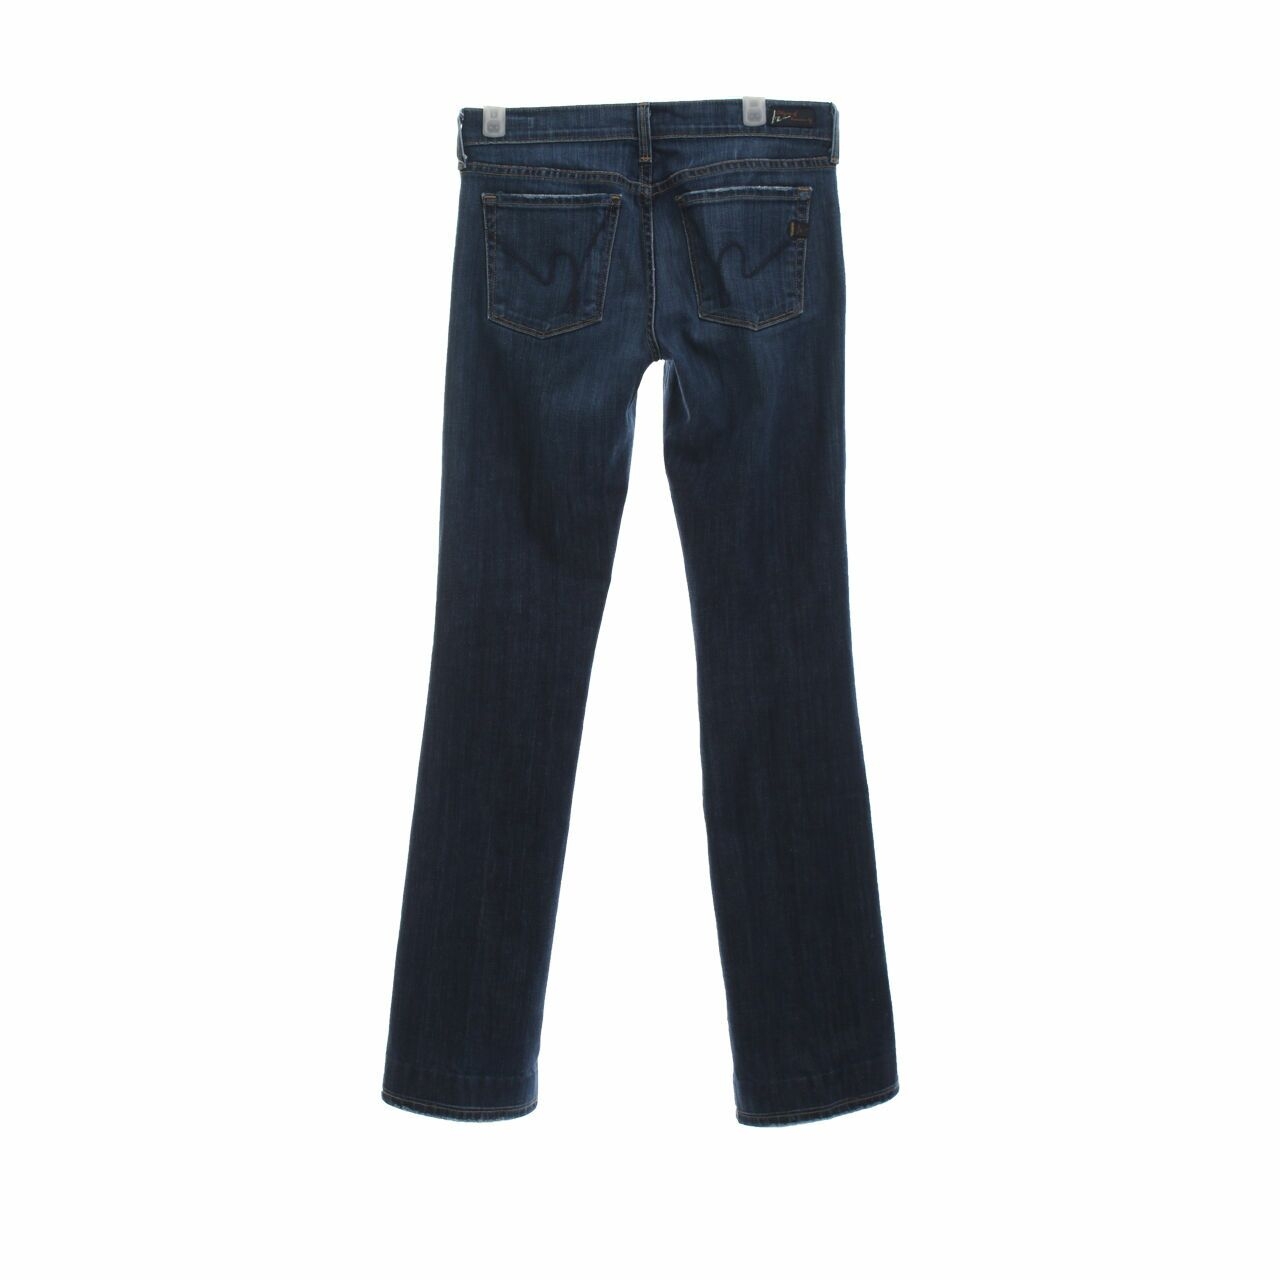 Citizens of Humanity Dark Blue Jeans